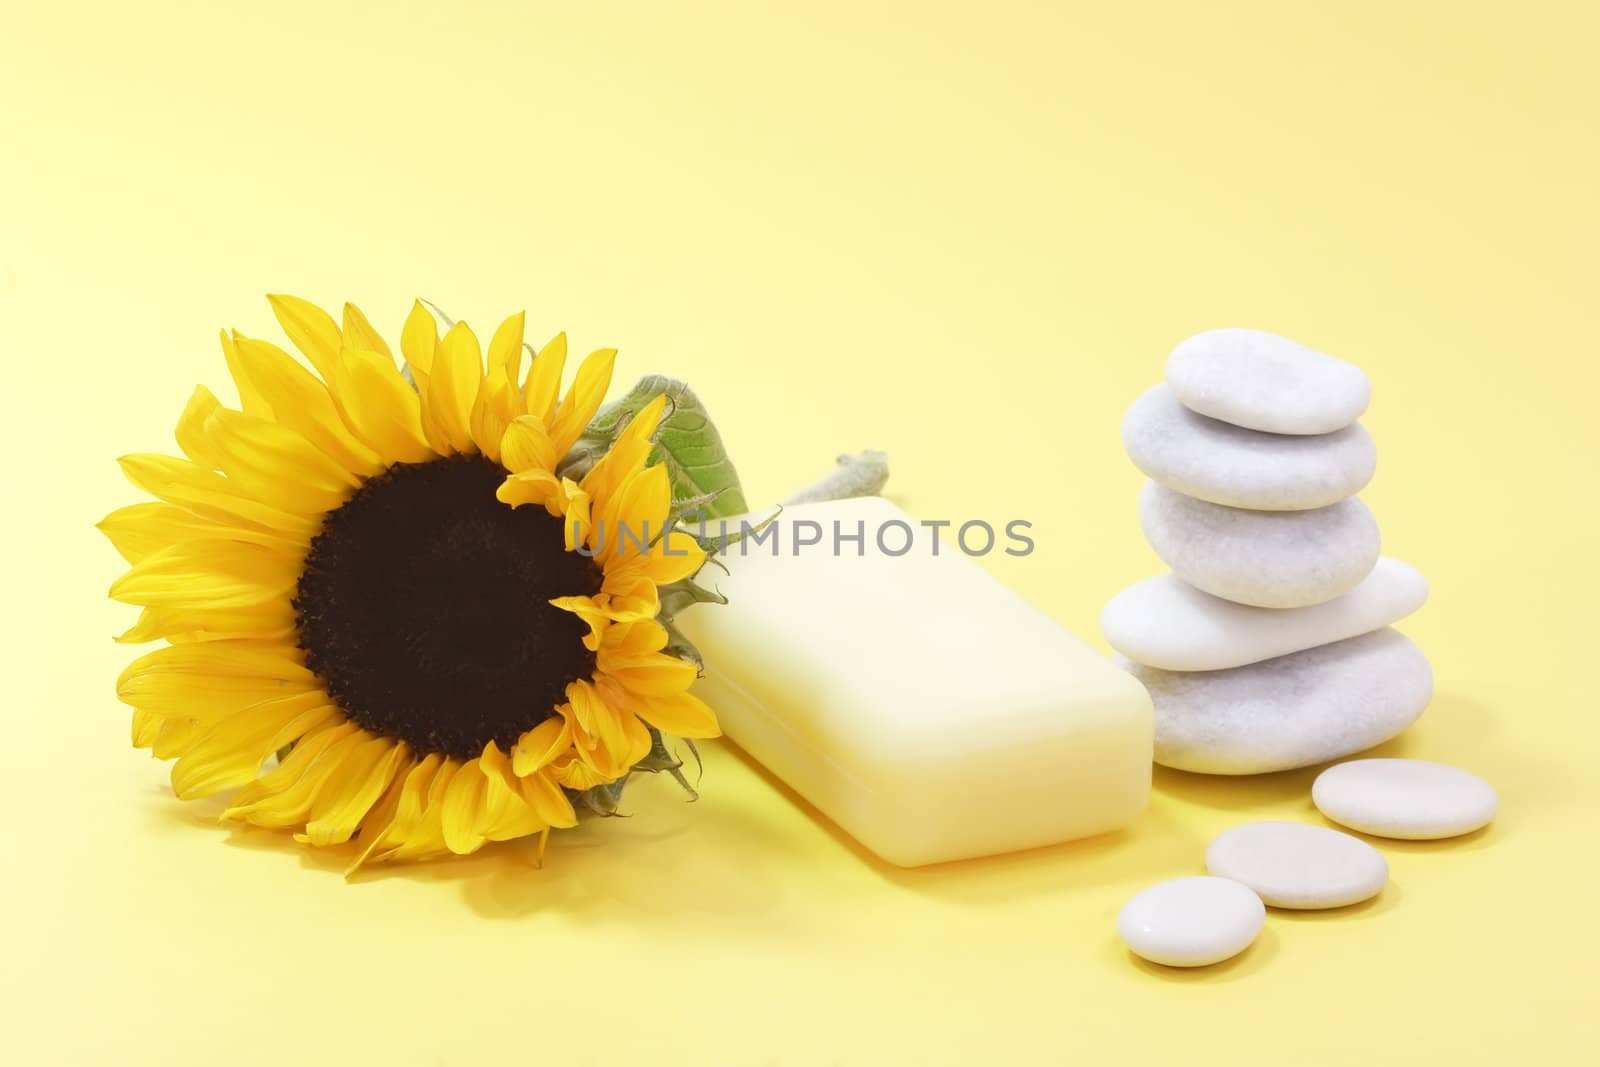 Bar of soap and a sunflower on yellow background